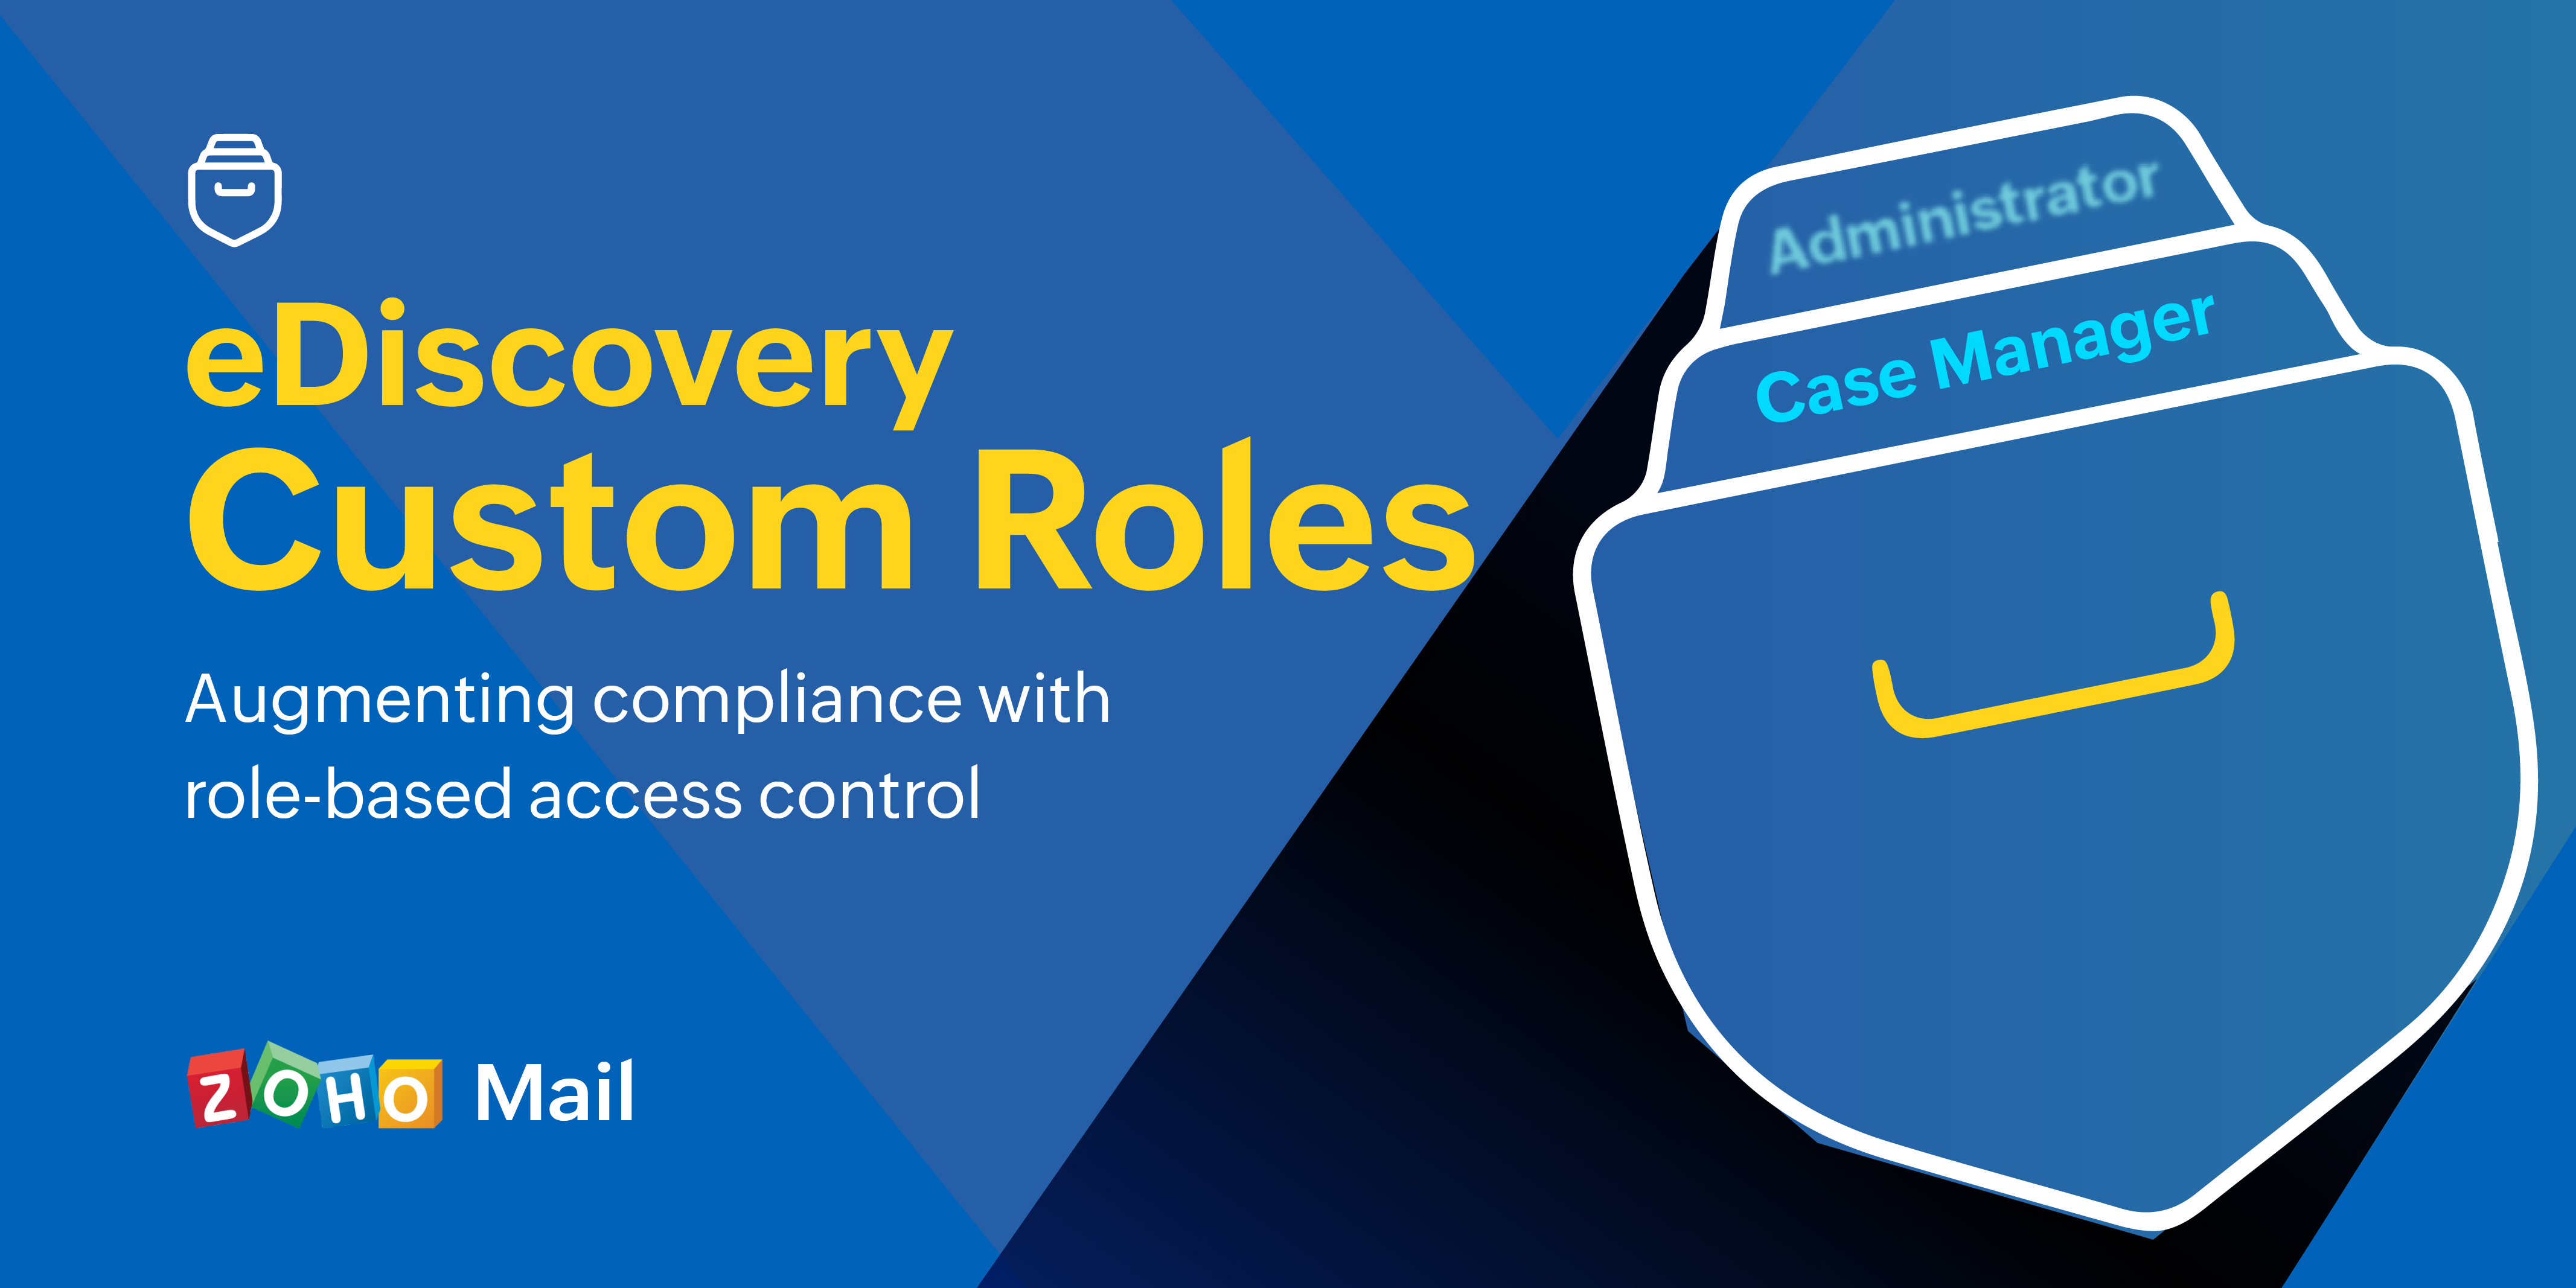 eDiscovery Custom Roles: Augmenting compliance with role-based access control